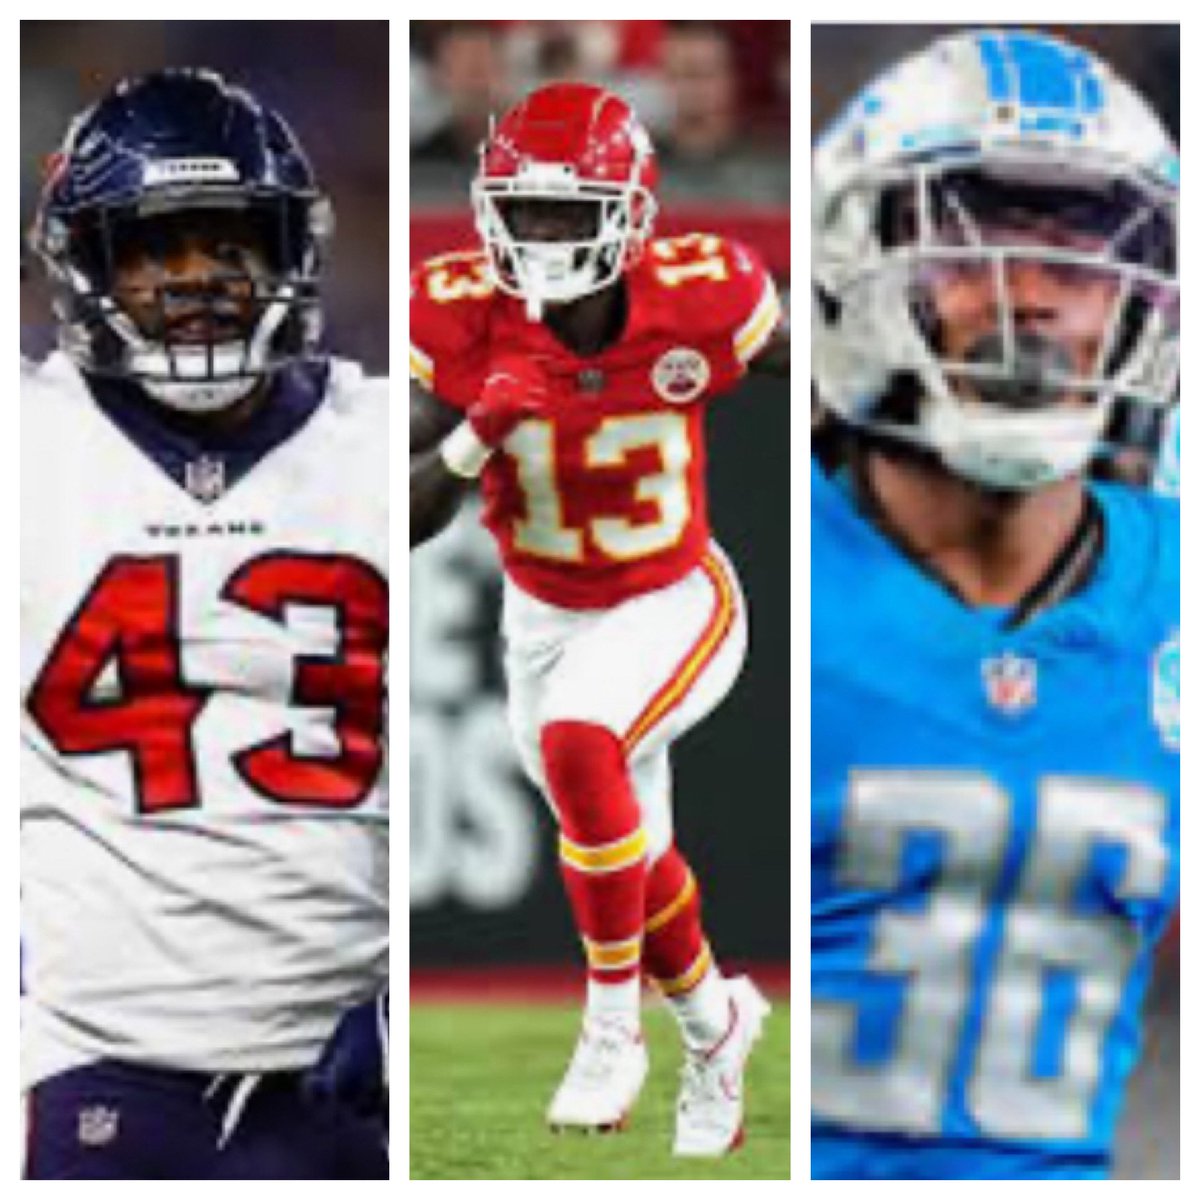 Good luck to former @HerdFB greats @Neville_Hewitt of @HoustonTexans, @JohnsonNazeeh of @Chiefs and @toofyegilmore of @Lions as they are in @NFL 2nd round of the playoffs this weekend. Extremely proud of these young men!! #HerdFamily #OneHerd #HerdBrotherhood